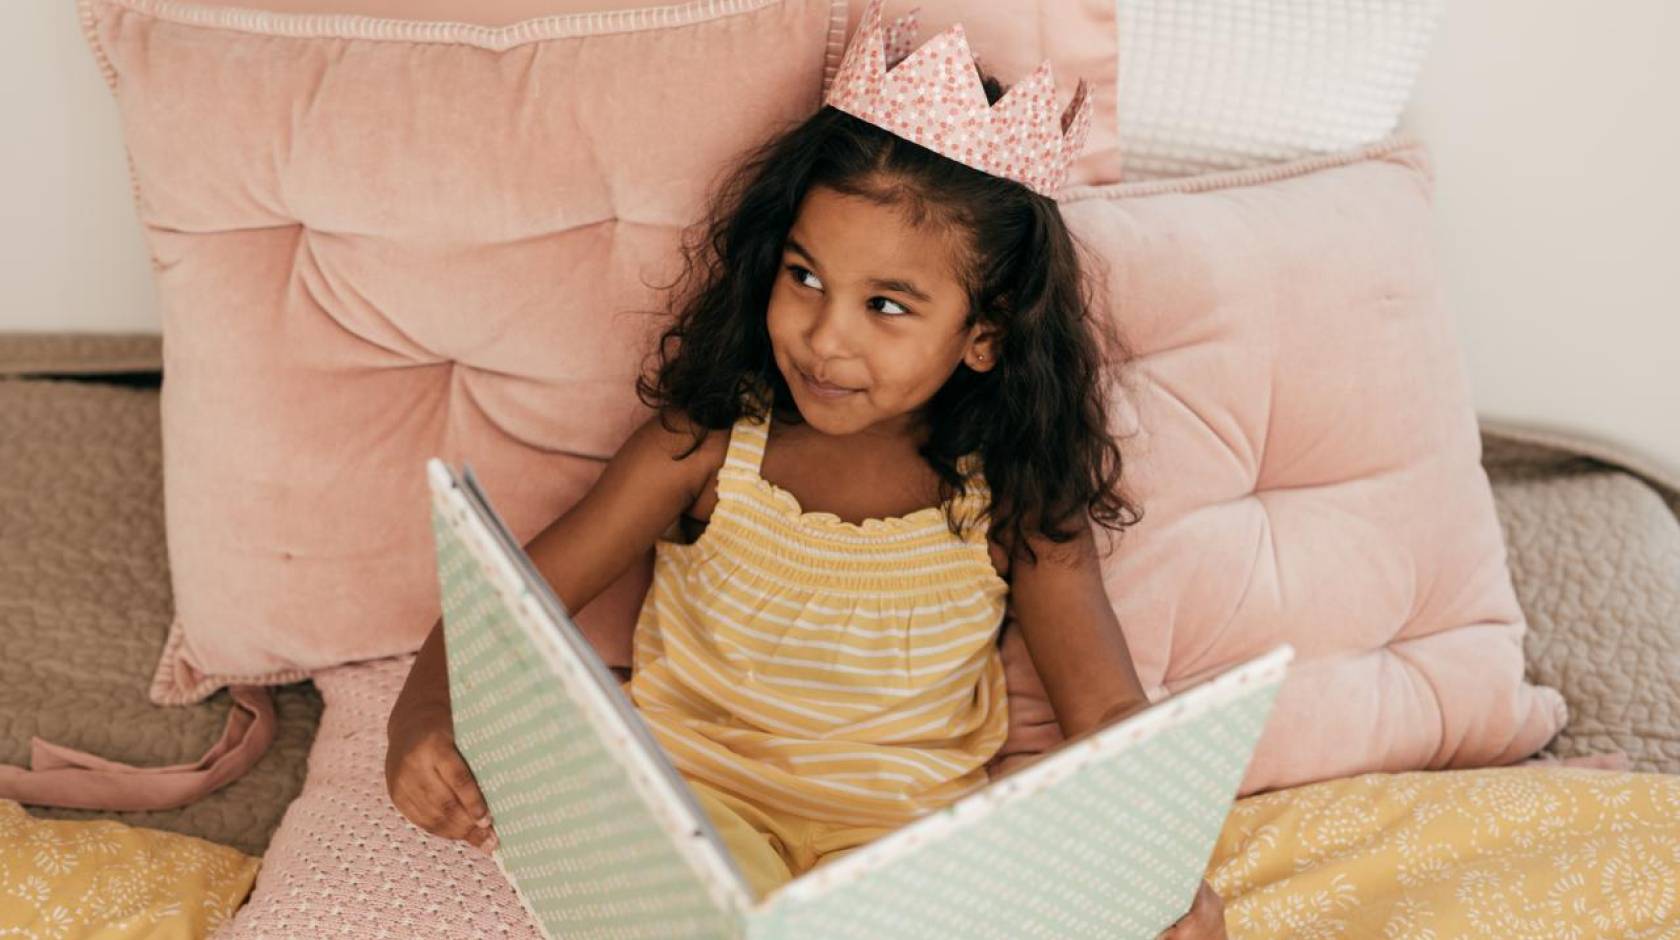 A young South Asian girl reads a book while wearing a crown and smiles